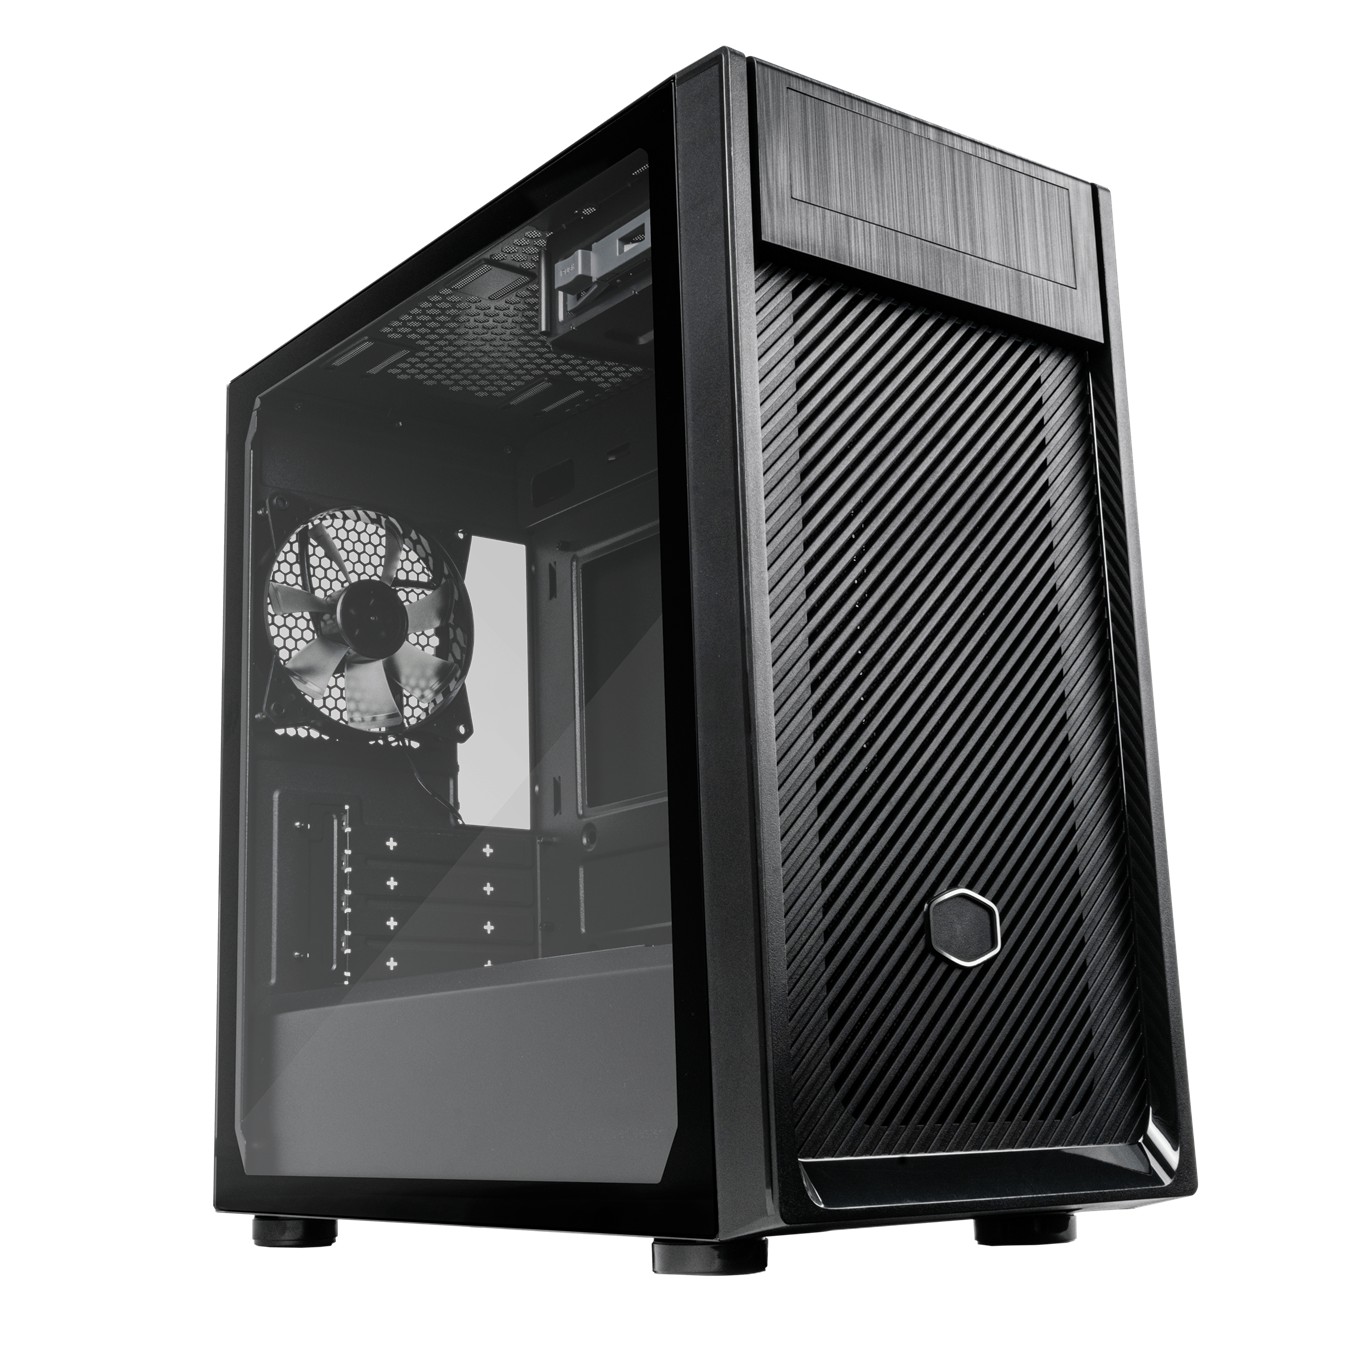 Elite 300 m-ATX PC Case - Supports up to five fans as well as front or top mounted radiators to ensure that performance is not compromised.